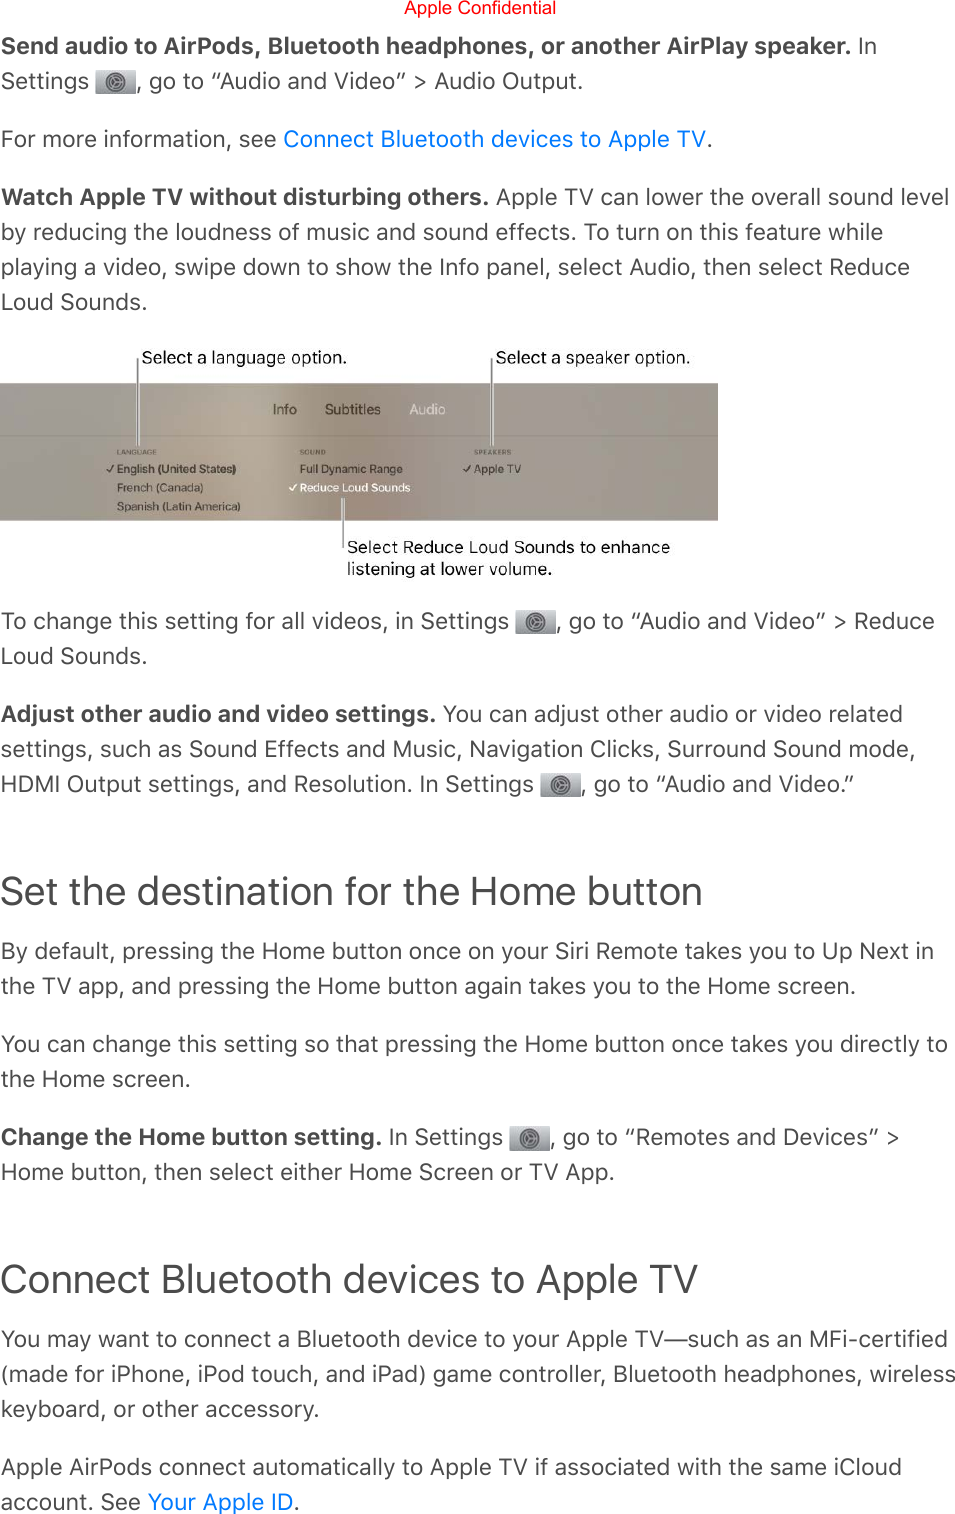 Send audio to AirPods, Bluetooth headphones, or another AirPlay speaker. InSettings  , go to “Audio and Video” &gt; Audio Output.For more information, see  .Watch Apple TV without disturbing others. Apple TV can lower the overall sound levelby reducing the loudness of music and sound effects. To turn on this feature whileplaying a video, swipe down to show the Info panel, select Audio, then select ReduceLoud Sounds.To change this setting for all videos, in Settings  , go to “Audio and Video” &gt; ReduceLoud Sounds.Adjust other audio and video settings. You can adjust other audio or video relatedsettings, such as Sound Effects and Music, Navigation Clicks, Surround Sound mode,HDMI Output settings, and Resolution. In Settings  , go to “Audio and Video.”Set the destination for the Home buttonBy default, pressing the Home button once on your Siri Remote takes you to Up Next inthe TV app, and pressing the Home button again takes you to the Home screen.You can change this setting so that pressing the Home button once takes you directly tothe Home screen.Change the Home button setting. In Settings  , go to “Remotes and Devices” &gt;Home button, then select either Home Screen or TV App.Connect Bluetooth devices to Apple TVYou may want to connect a Bluetooth device to your Apple TV—such as an MFi-certified(made for iPhone, iPod touch, and iPad) game controller, Bluetooth headphones, wirelesskeyboard, or other accessory.Apple AirPods connect automatically to Apple TV if associated with the same iCloudaccount. See  .Connect Bluetooth devices to Apple TVYour Apple IDApple Confidential